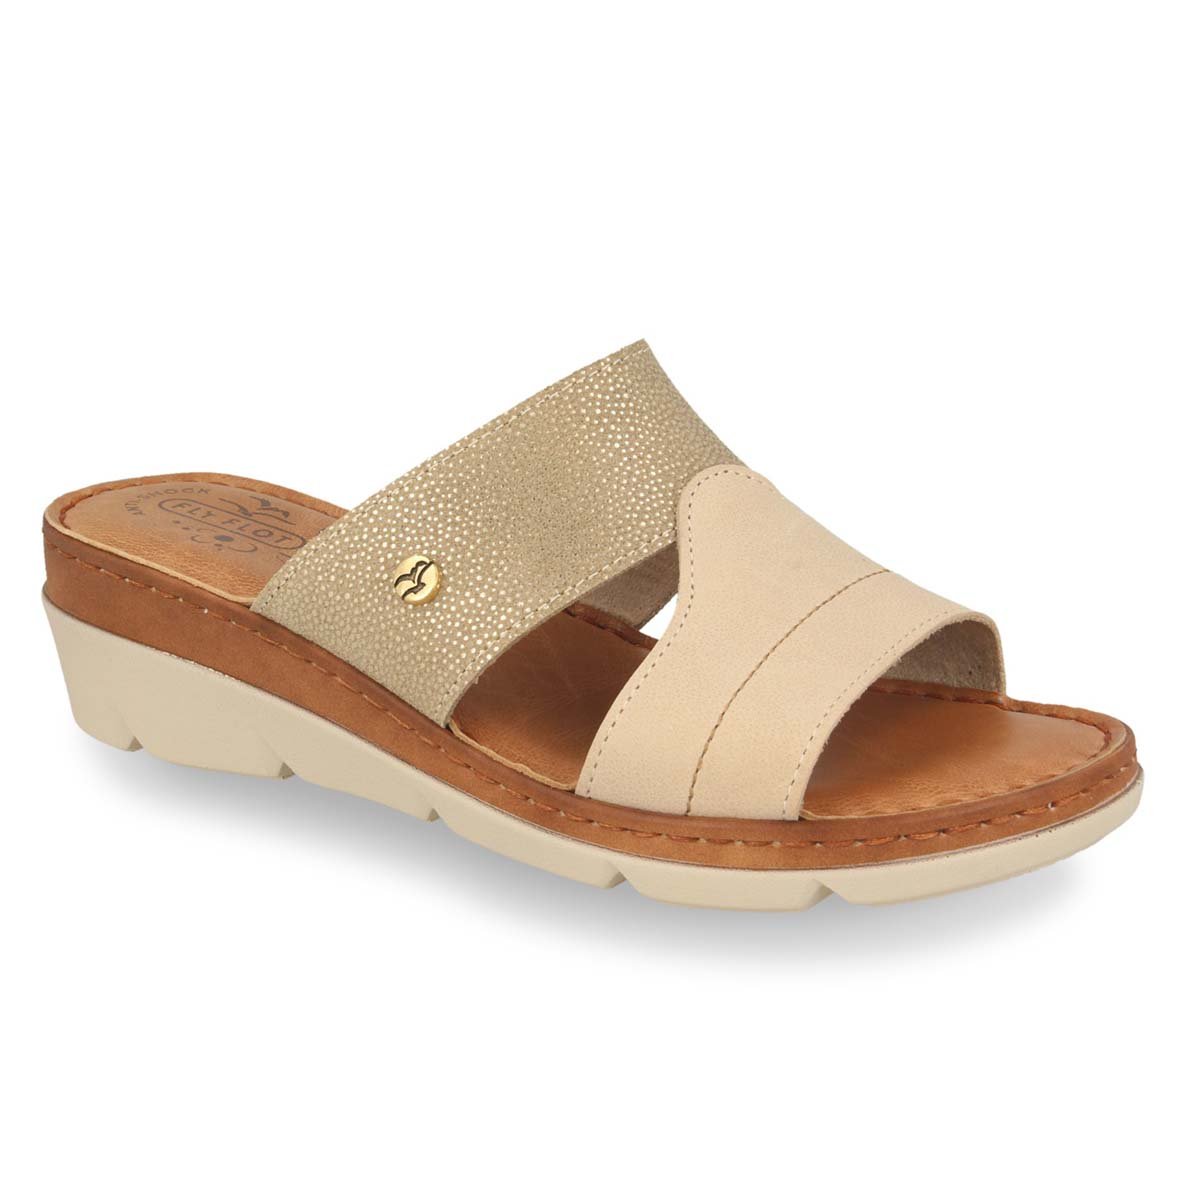 See the Leather Slide Women Sandals With Anti-Shock Cushioned Leather Insole in the colour BEIGE, available in various sizes